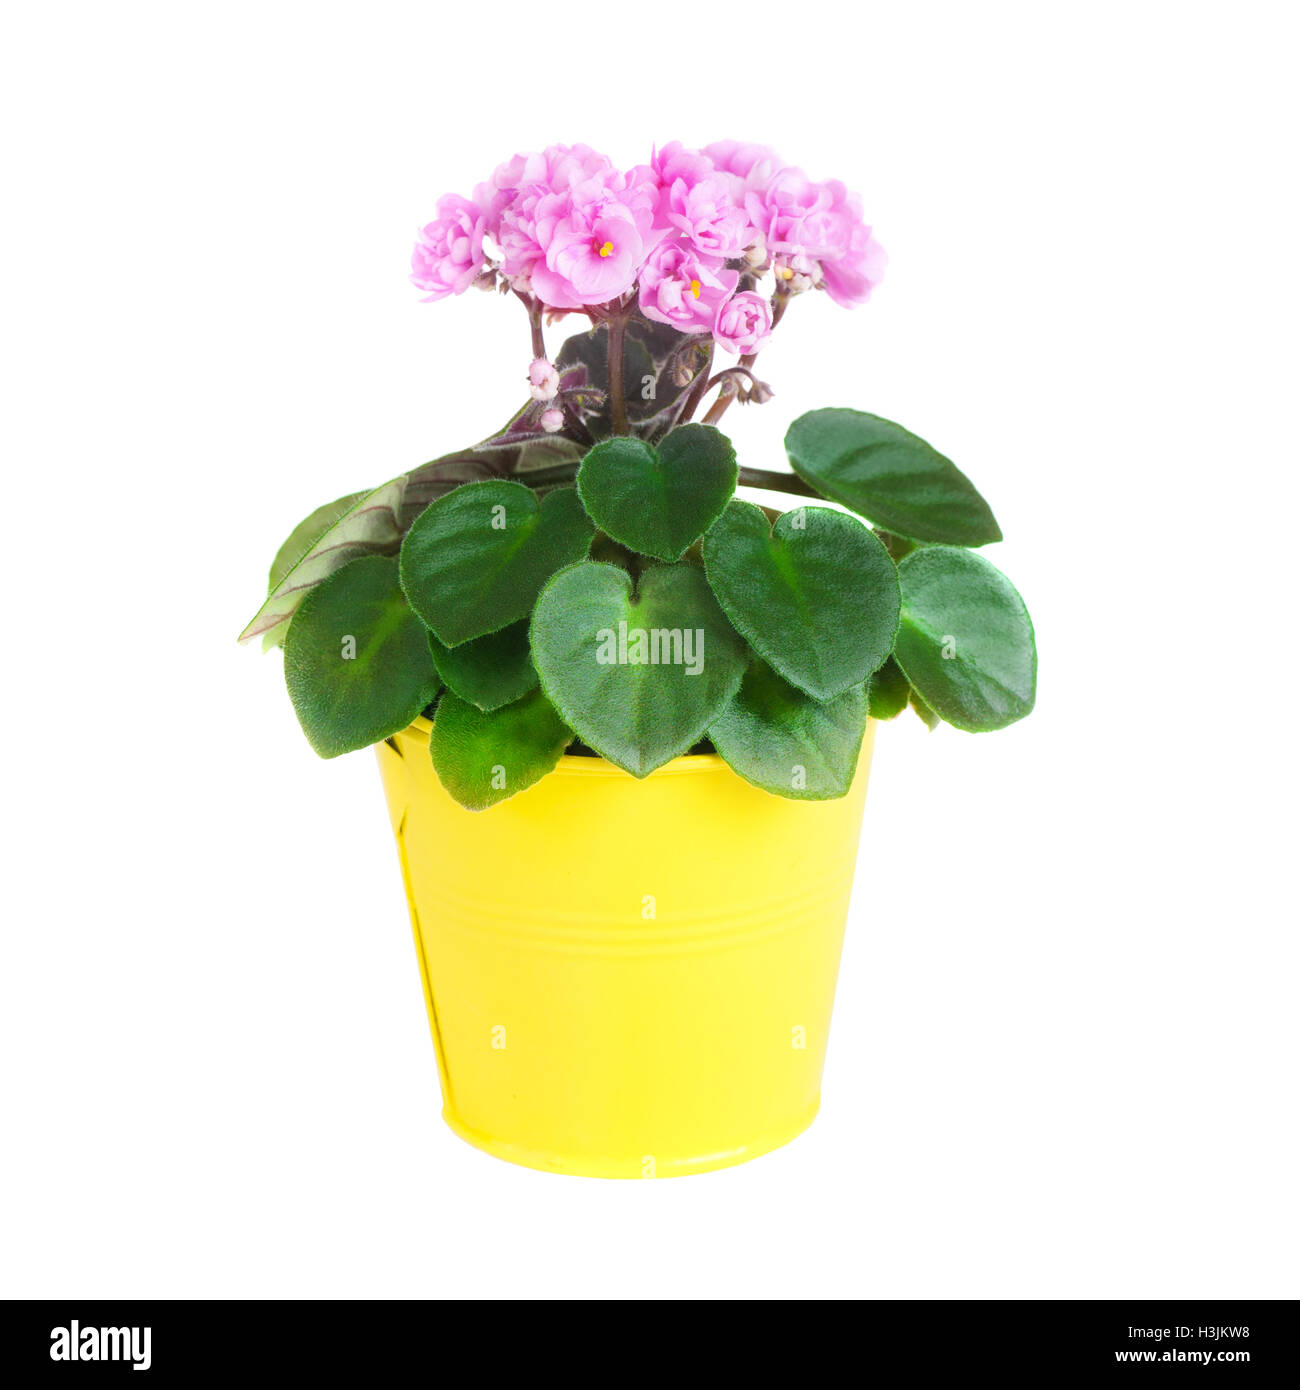 Pink Saintpaulia in a yellow flowerpot isolated on white background close up Stock Photo